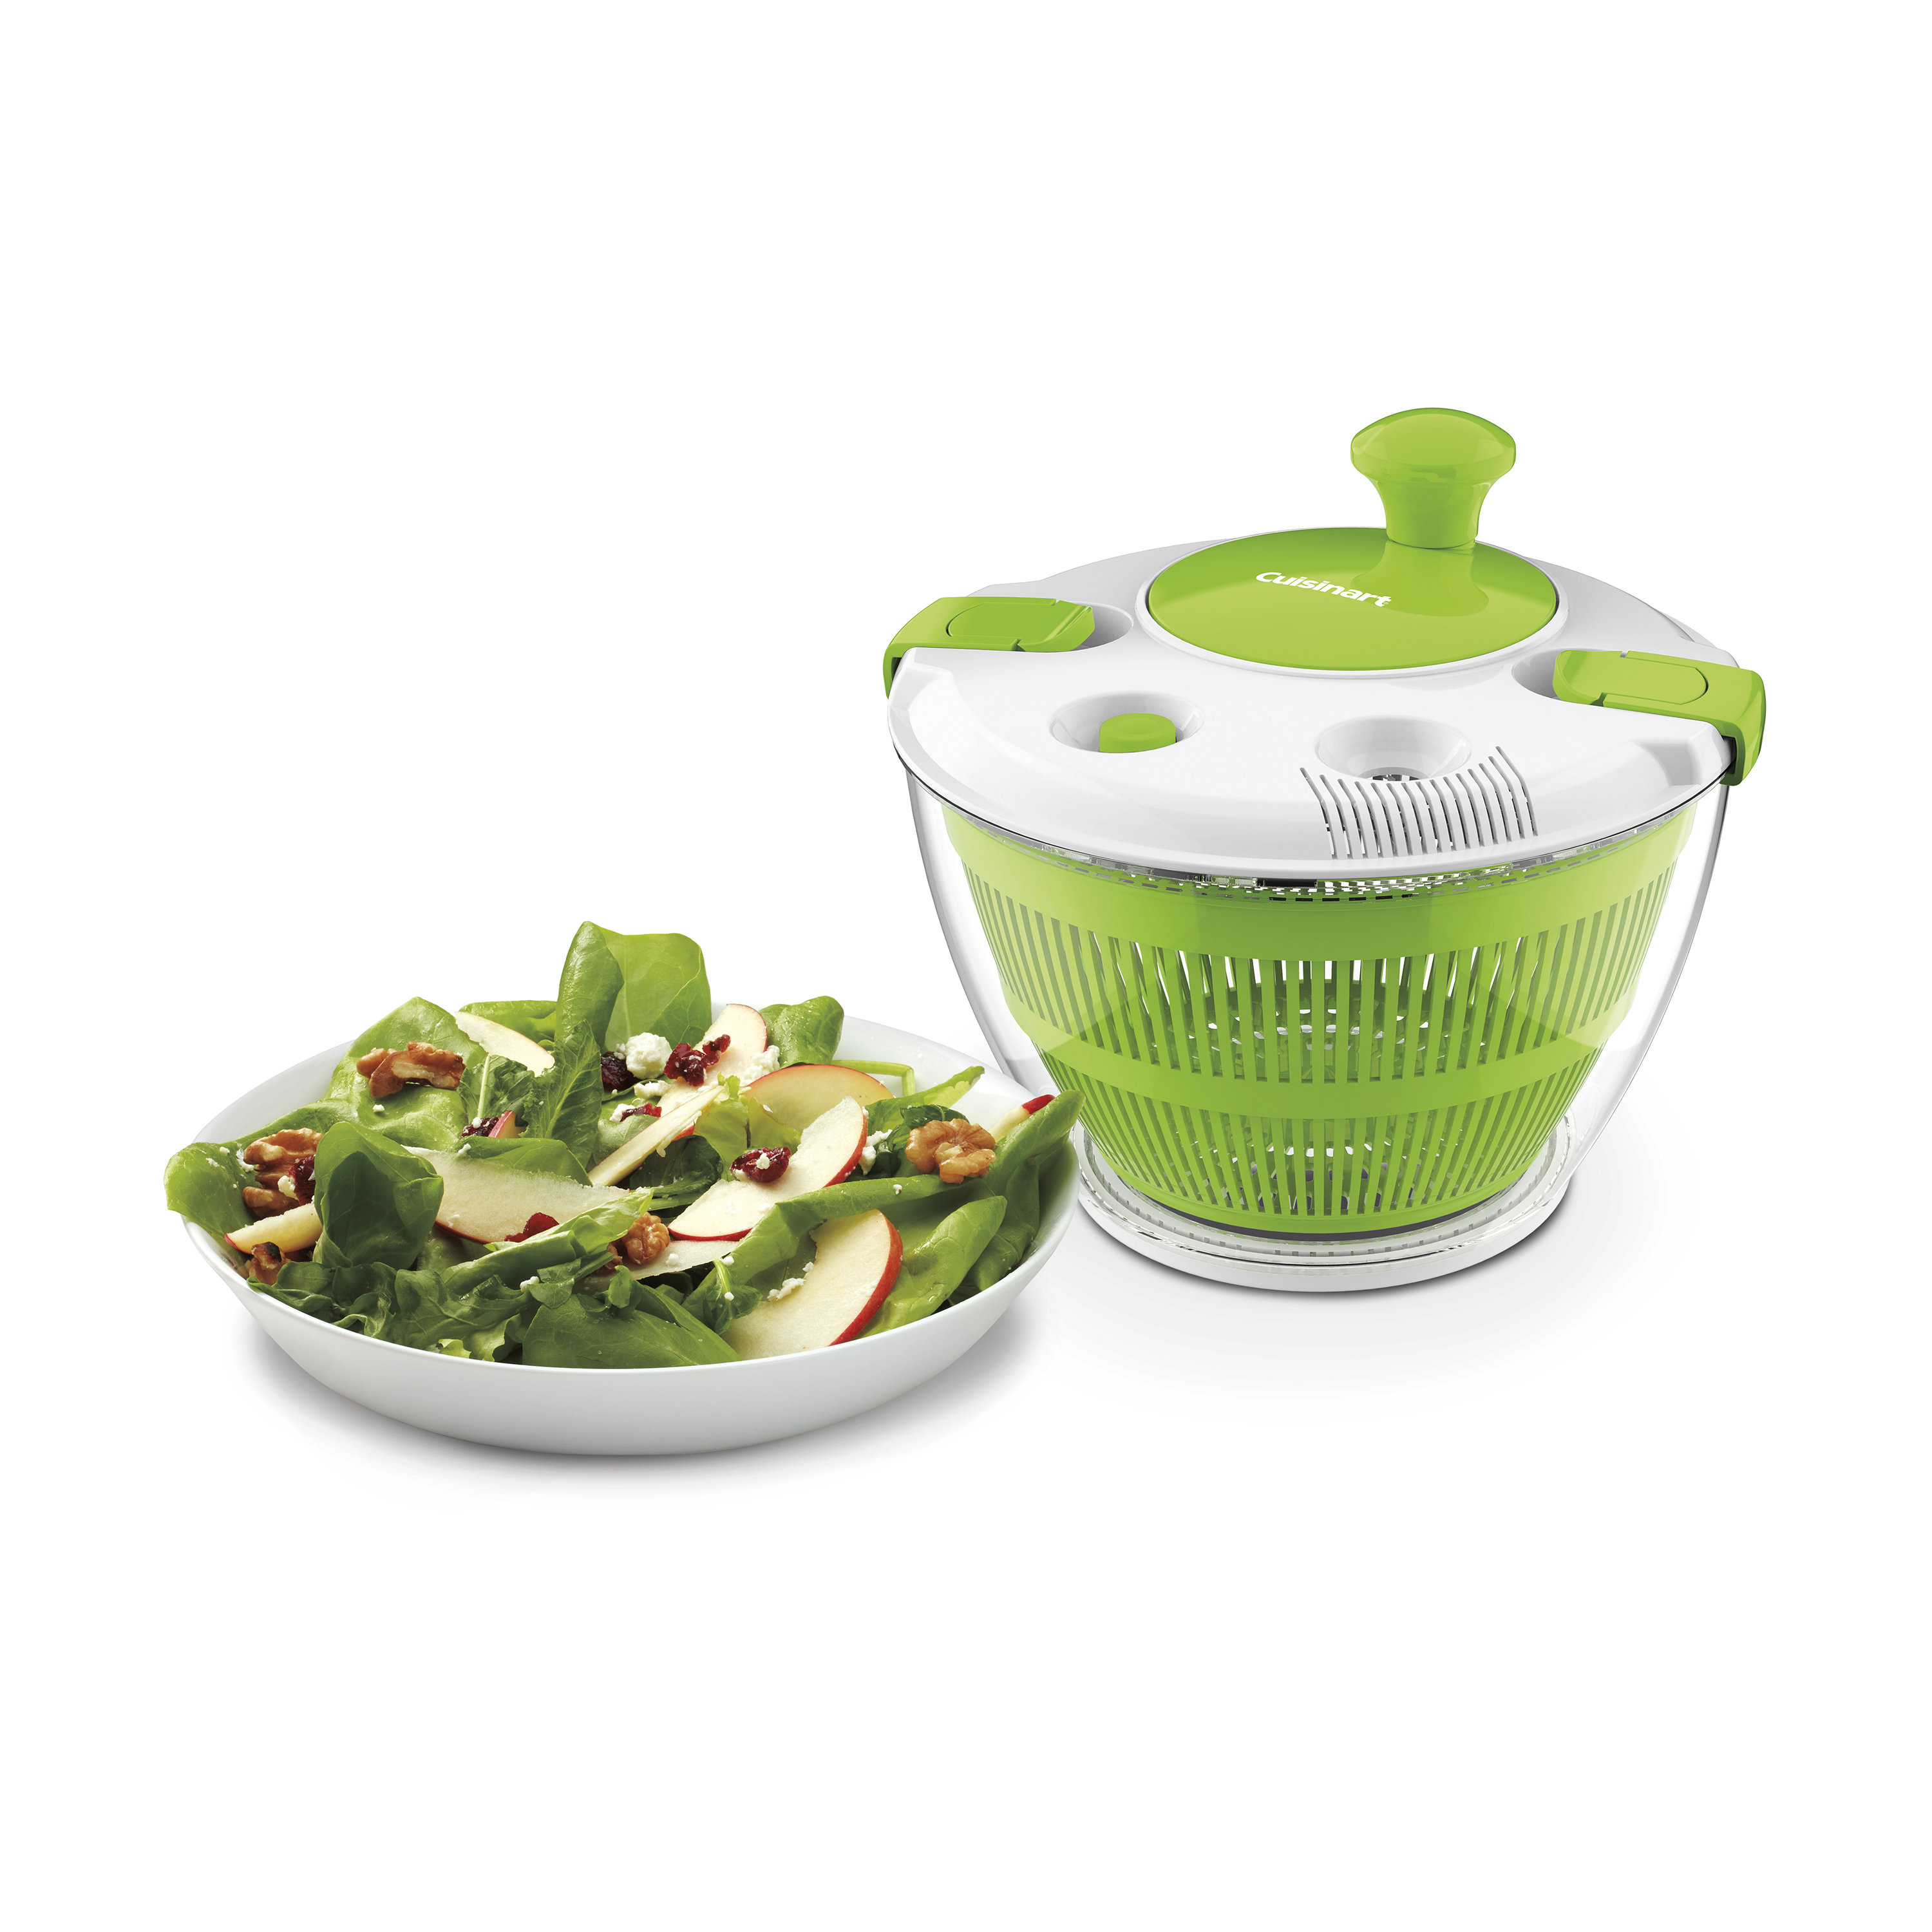  OXO Good Grips Large Salad Spinner - 6.22 Qt. & Good Grips  2-Piece Cutting Board Set: Home & Kitchen